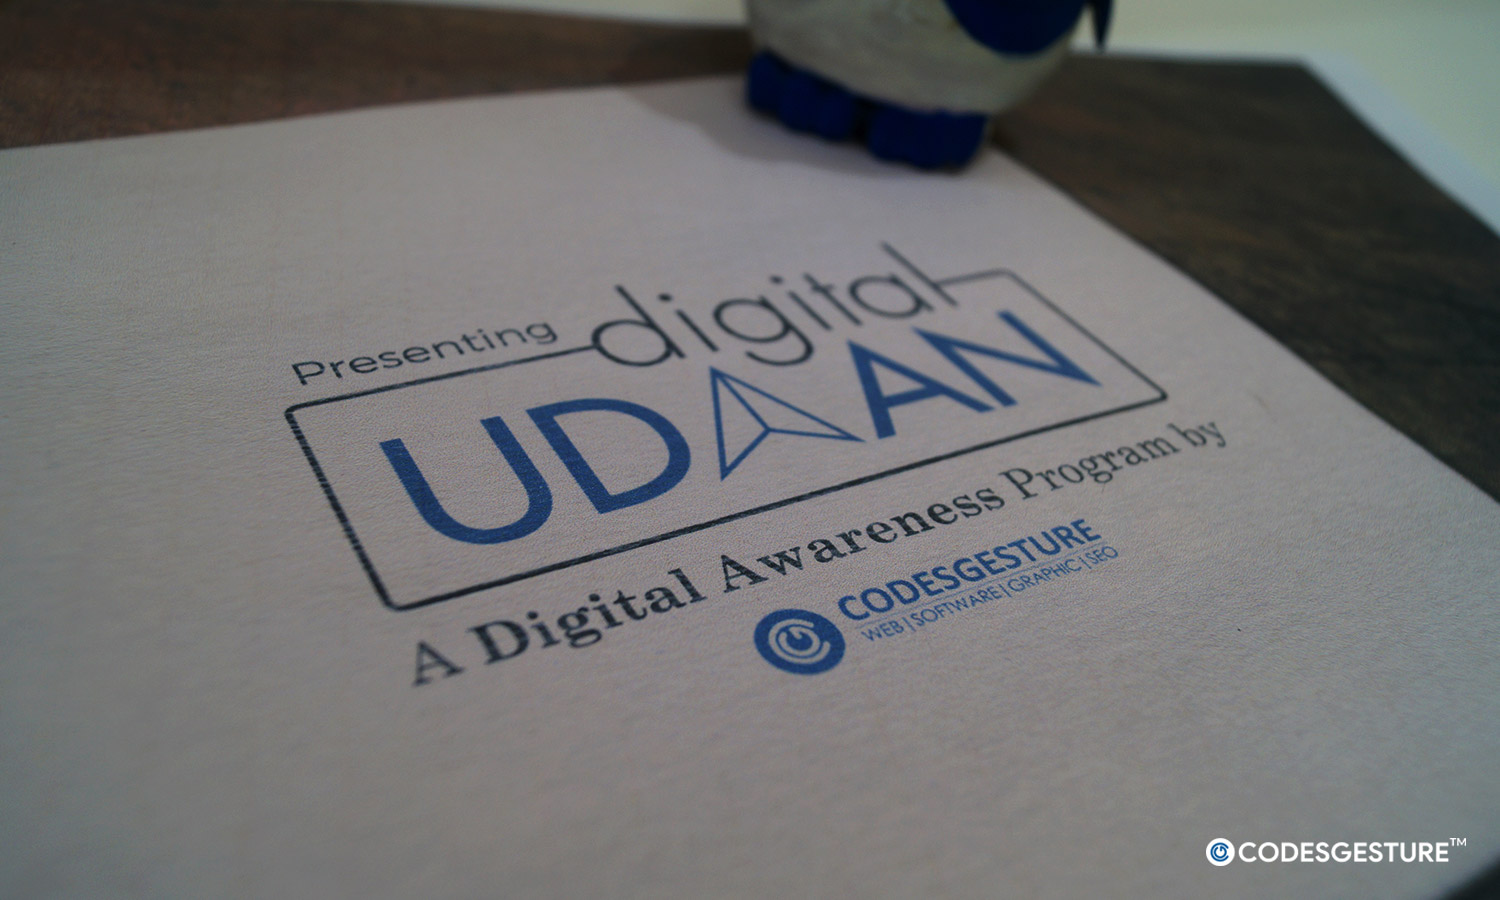 Digital Udaan is an initiative by CodesGesture.com to make Street Vendors capable to get the benefits of Information Technology.